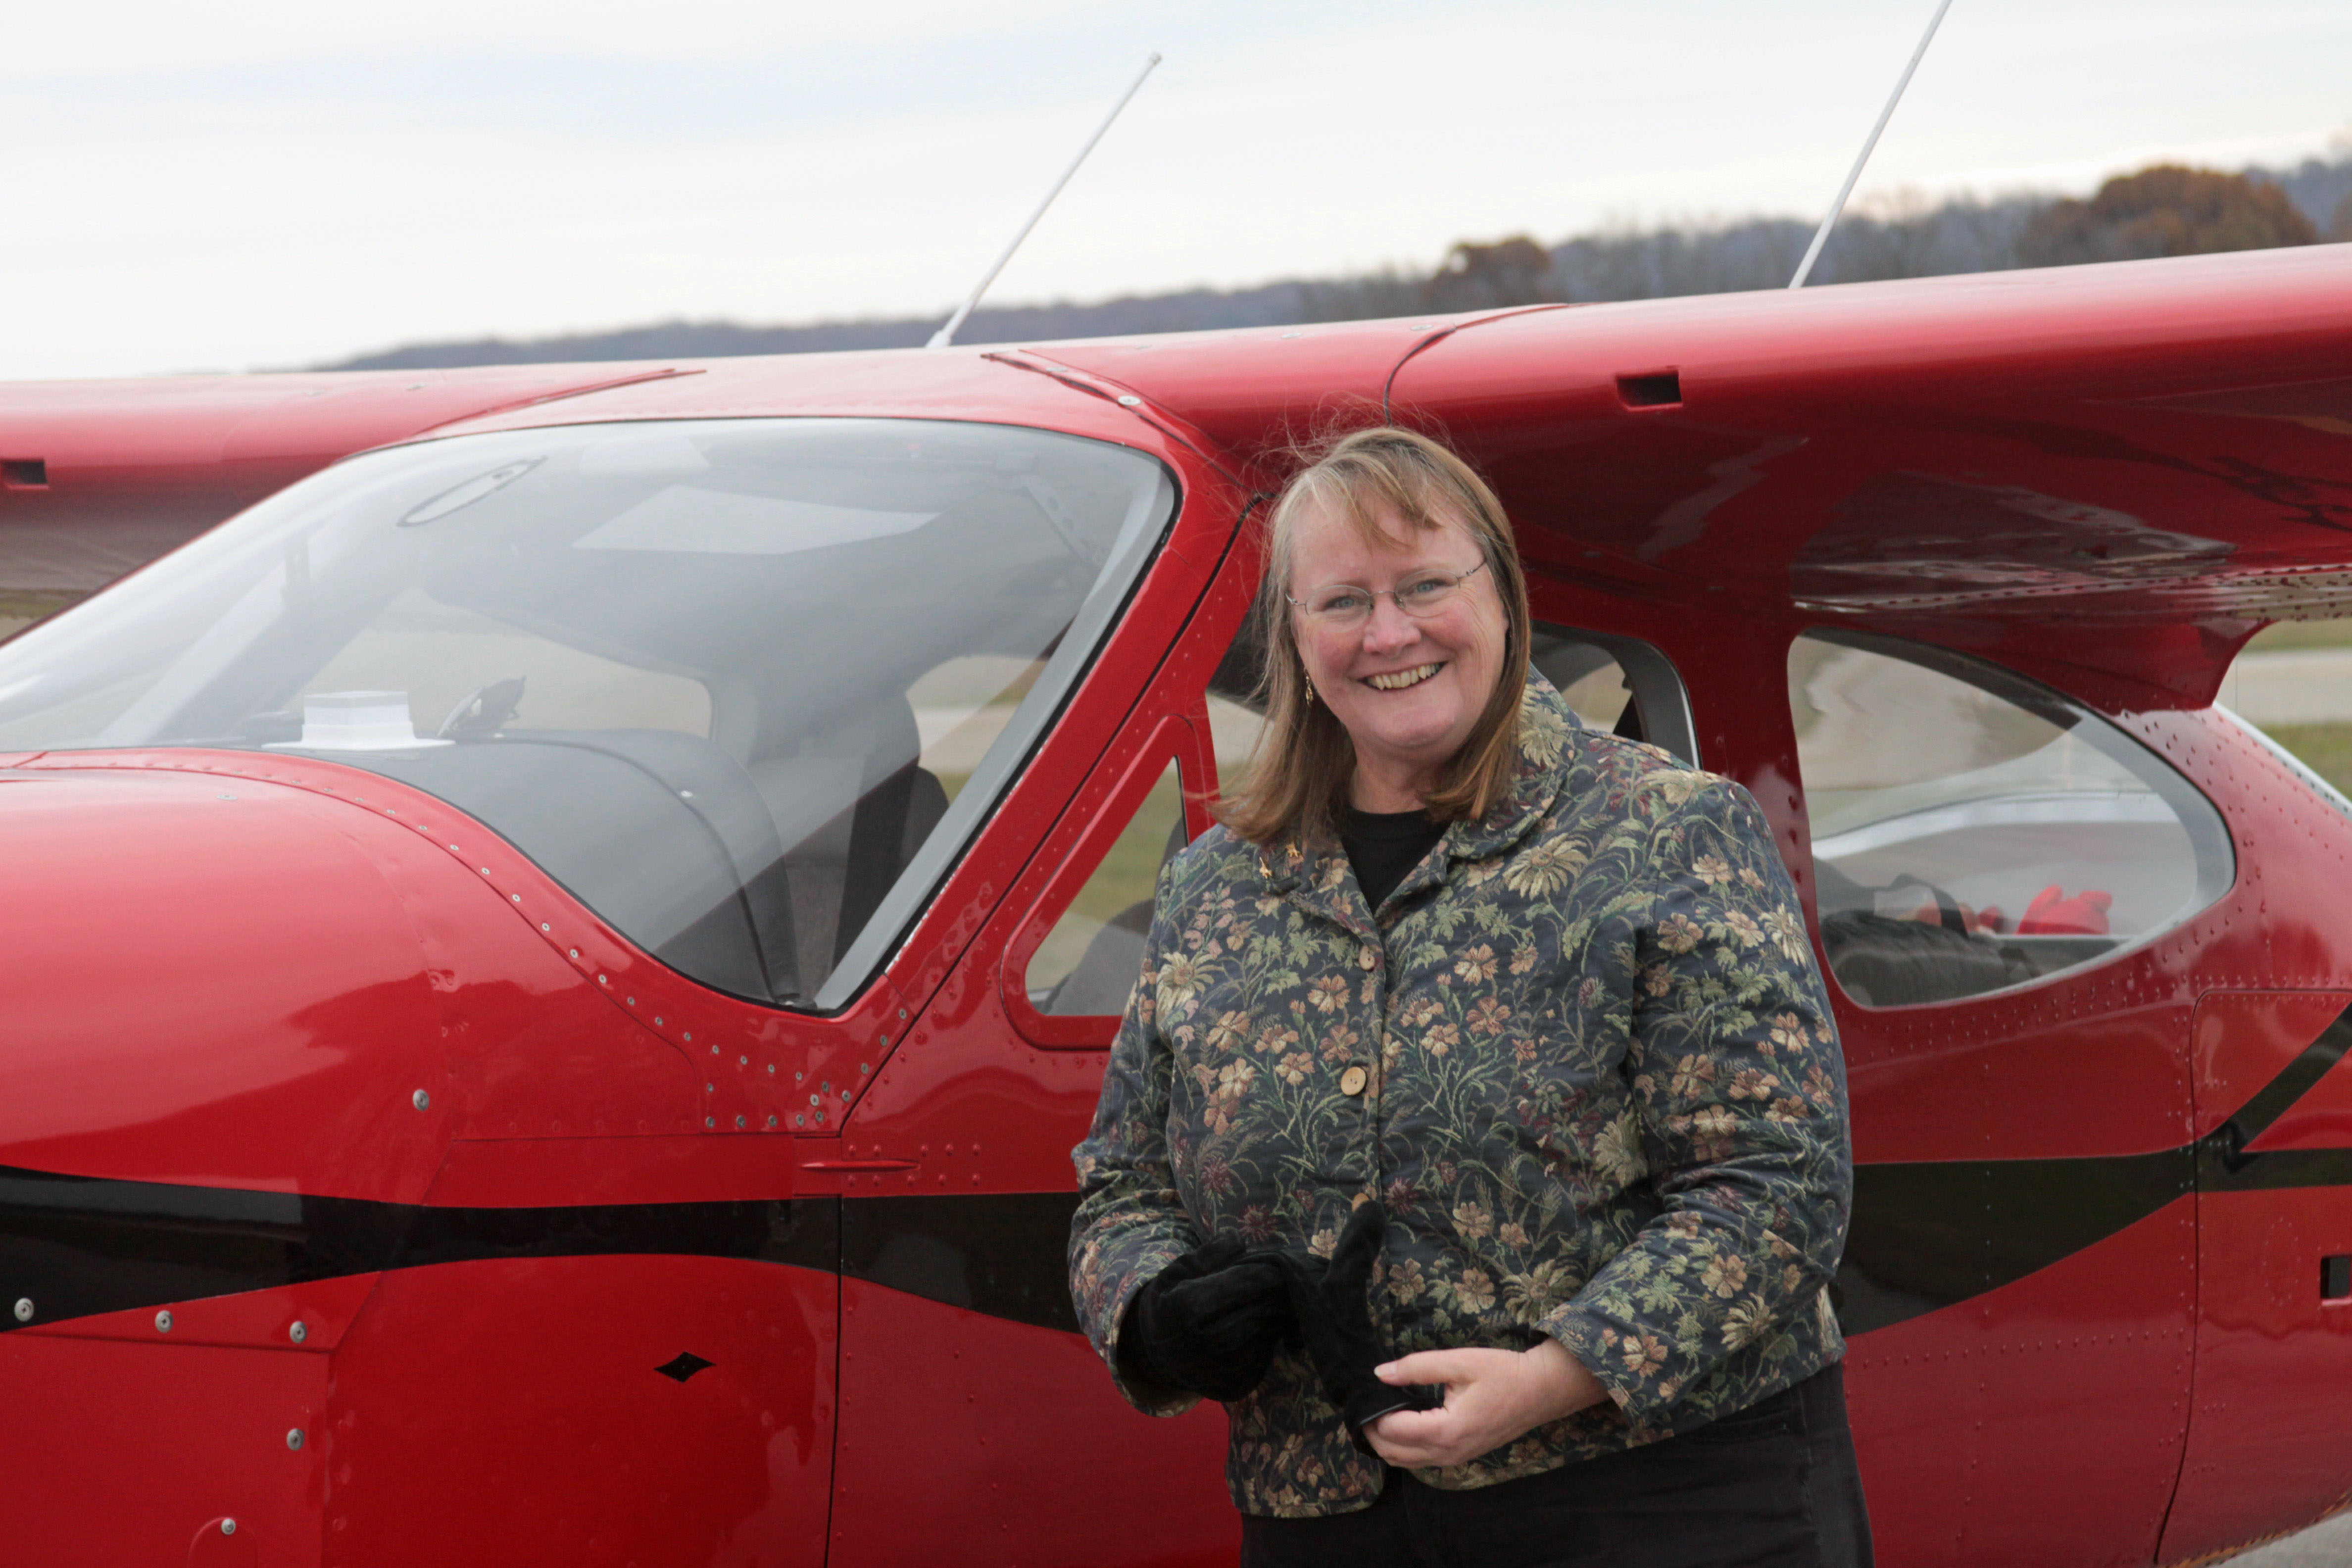 Kathy Vesely in front of small red plane